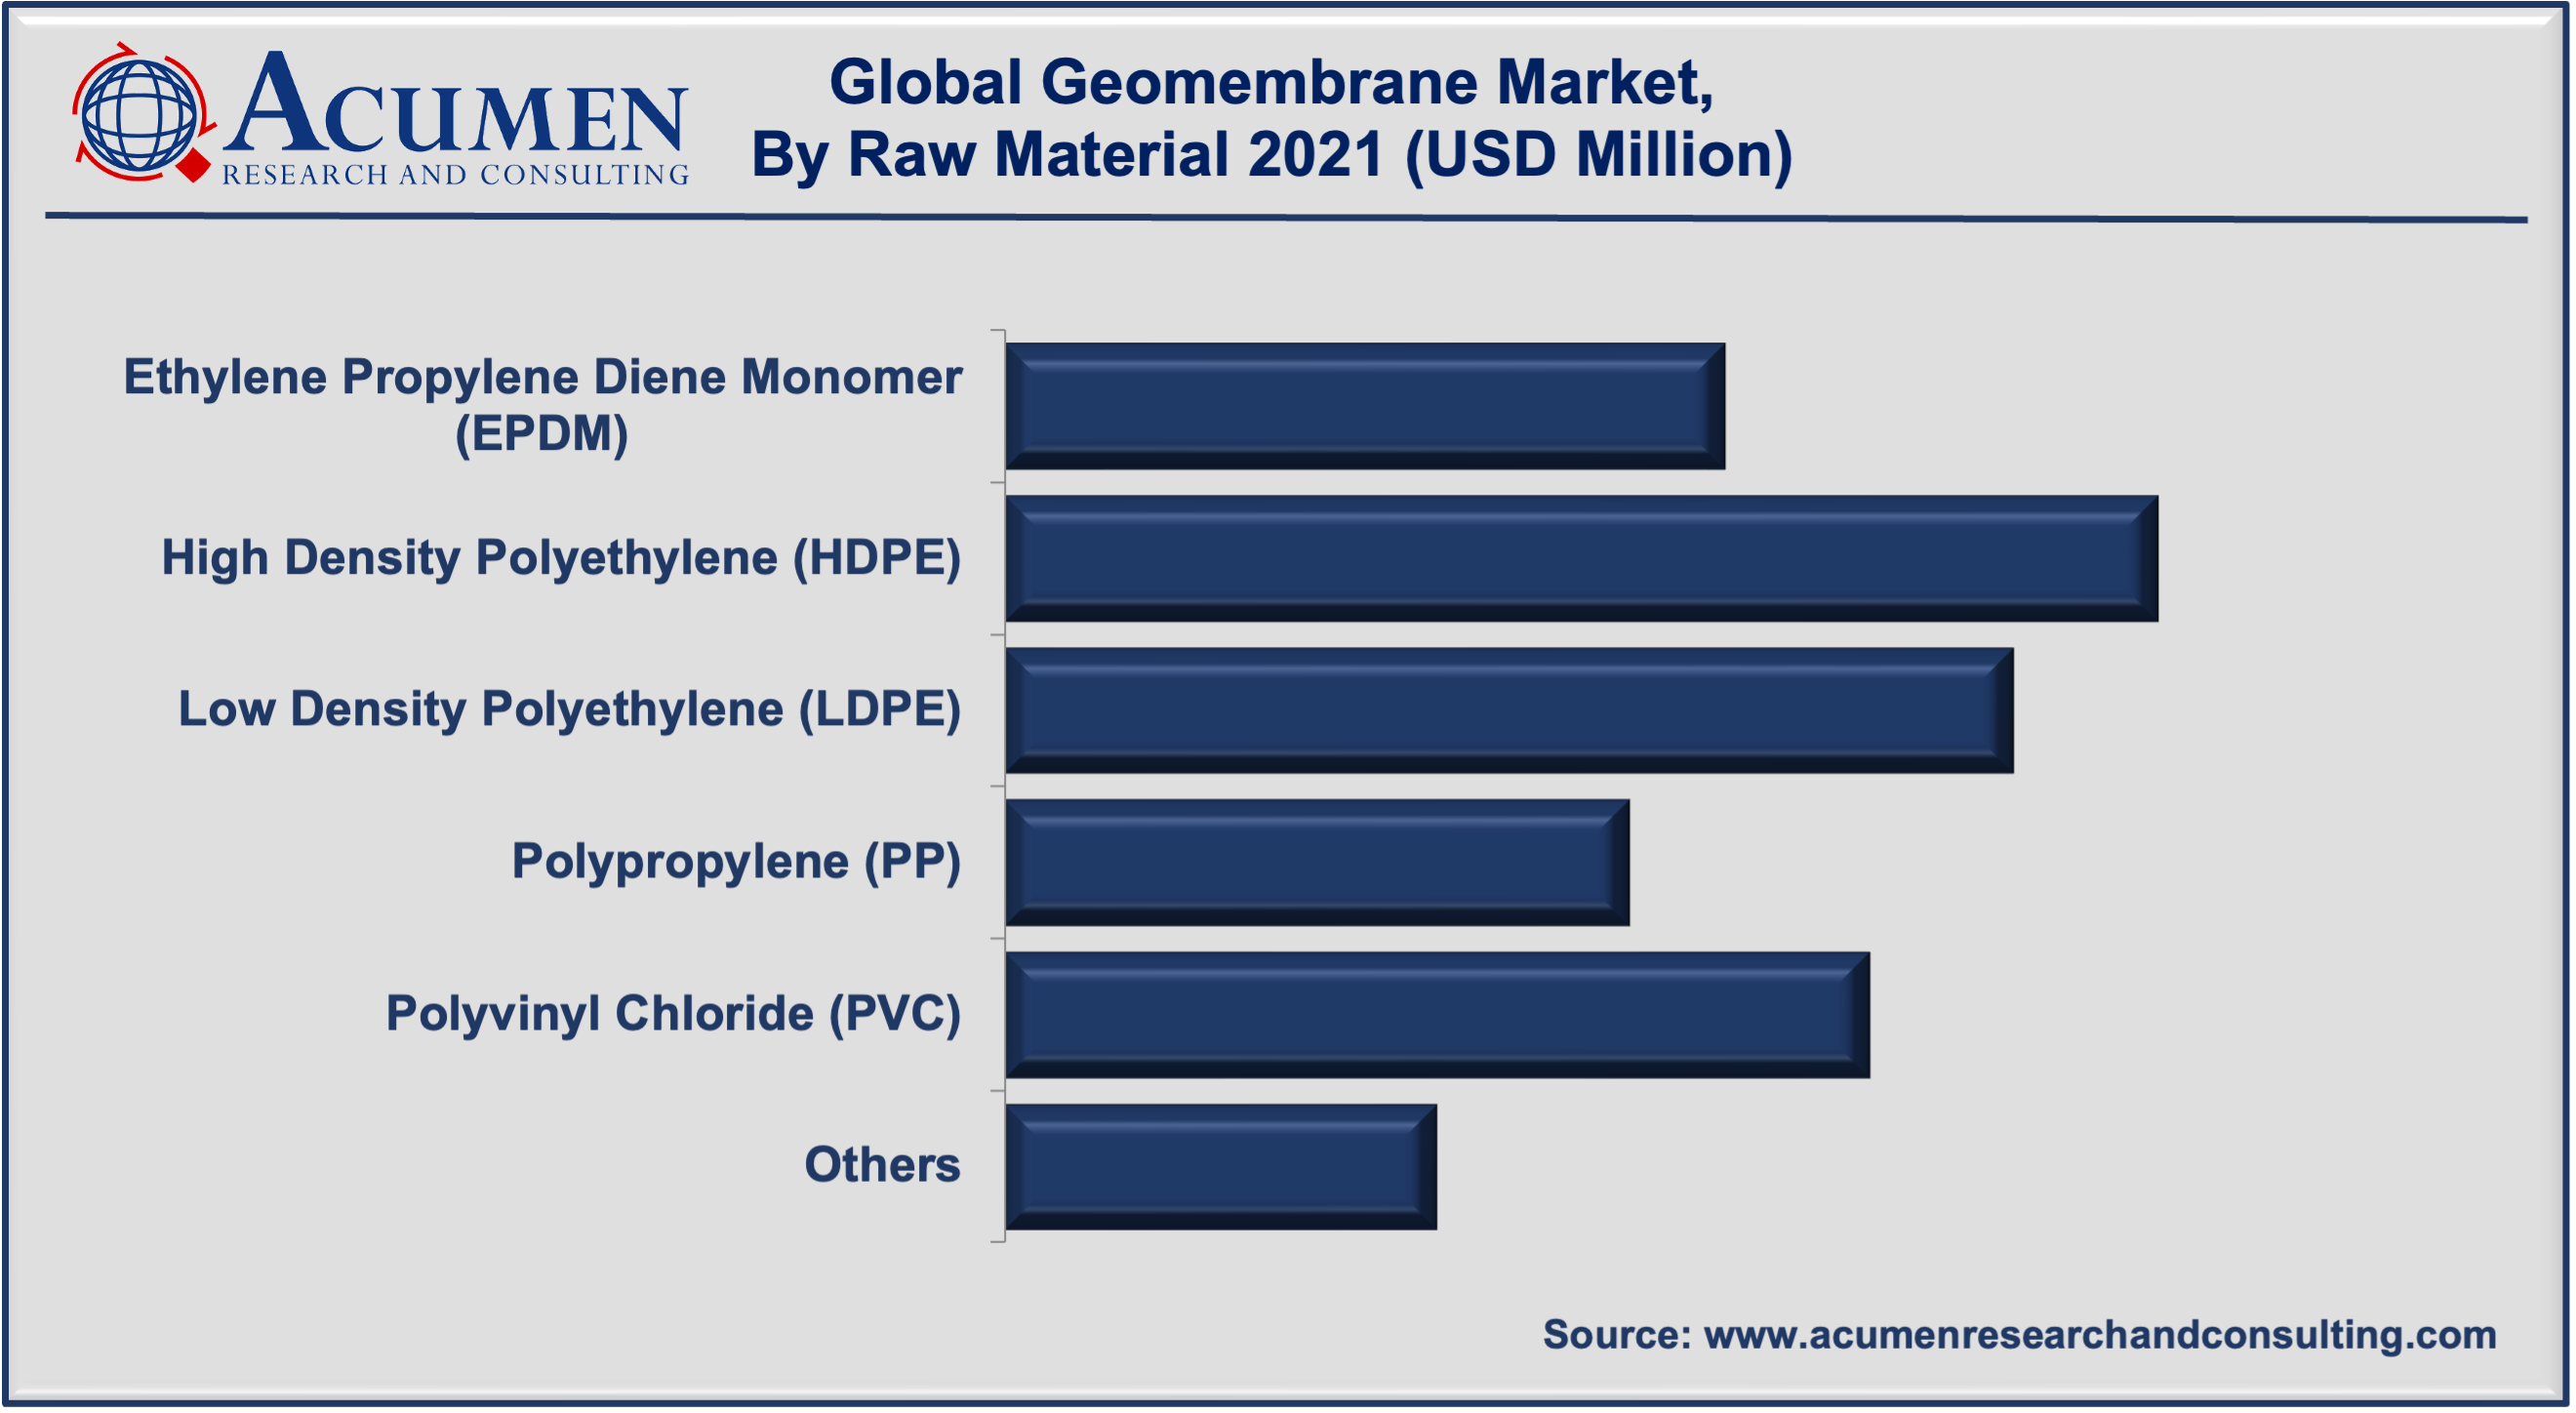 Geomembrane Market Share accounted for USD 2,098 Million in 2021 and is expected to reach USD 3,241 Million by 2030 at a considerable CAGR of 5.1% during the forecast period from 2022 to 2030.